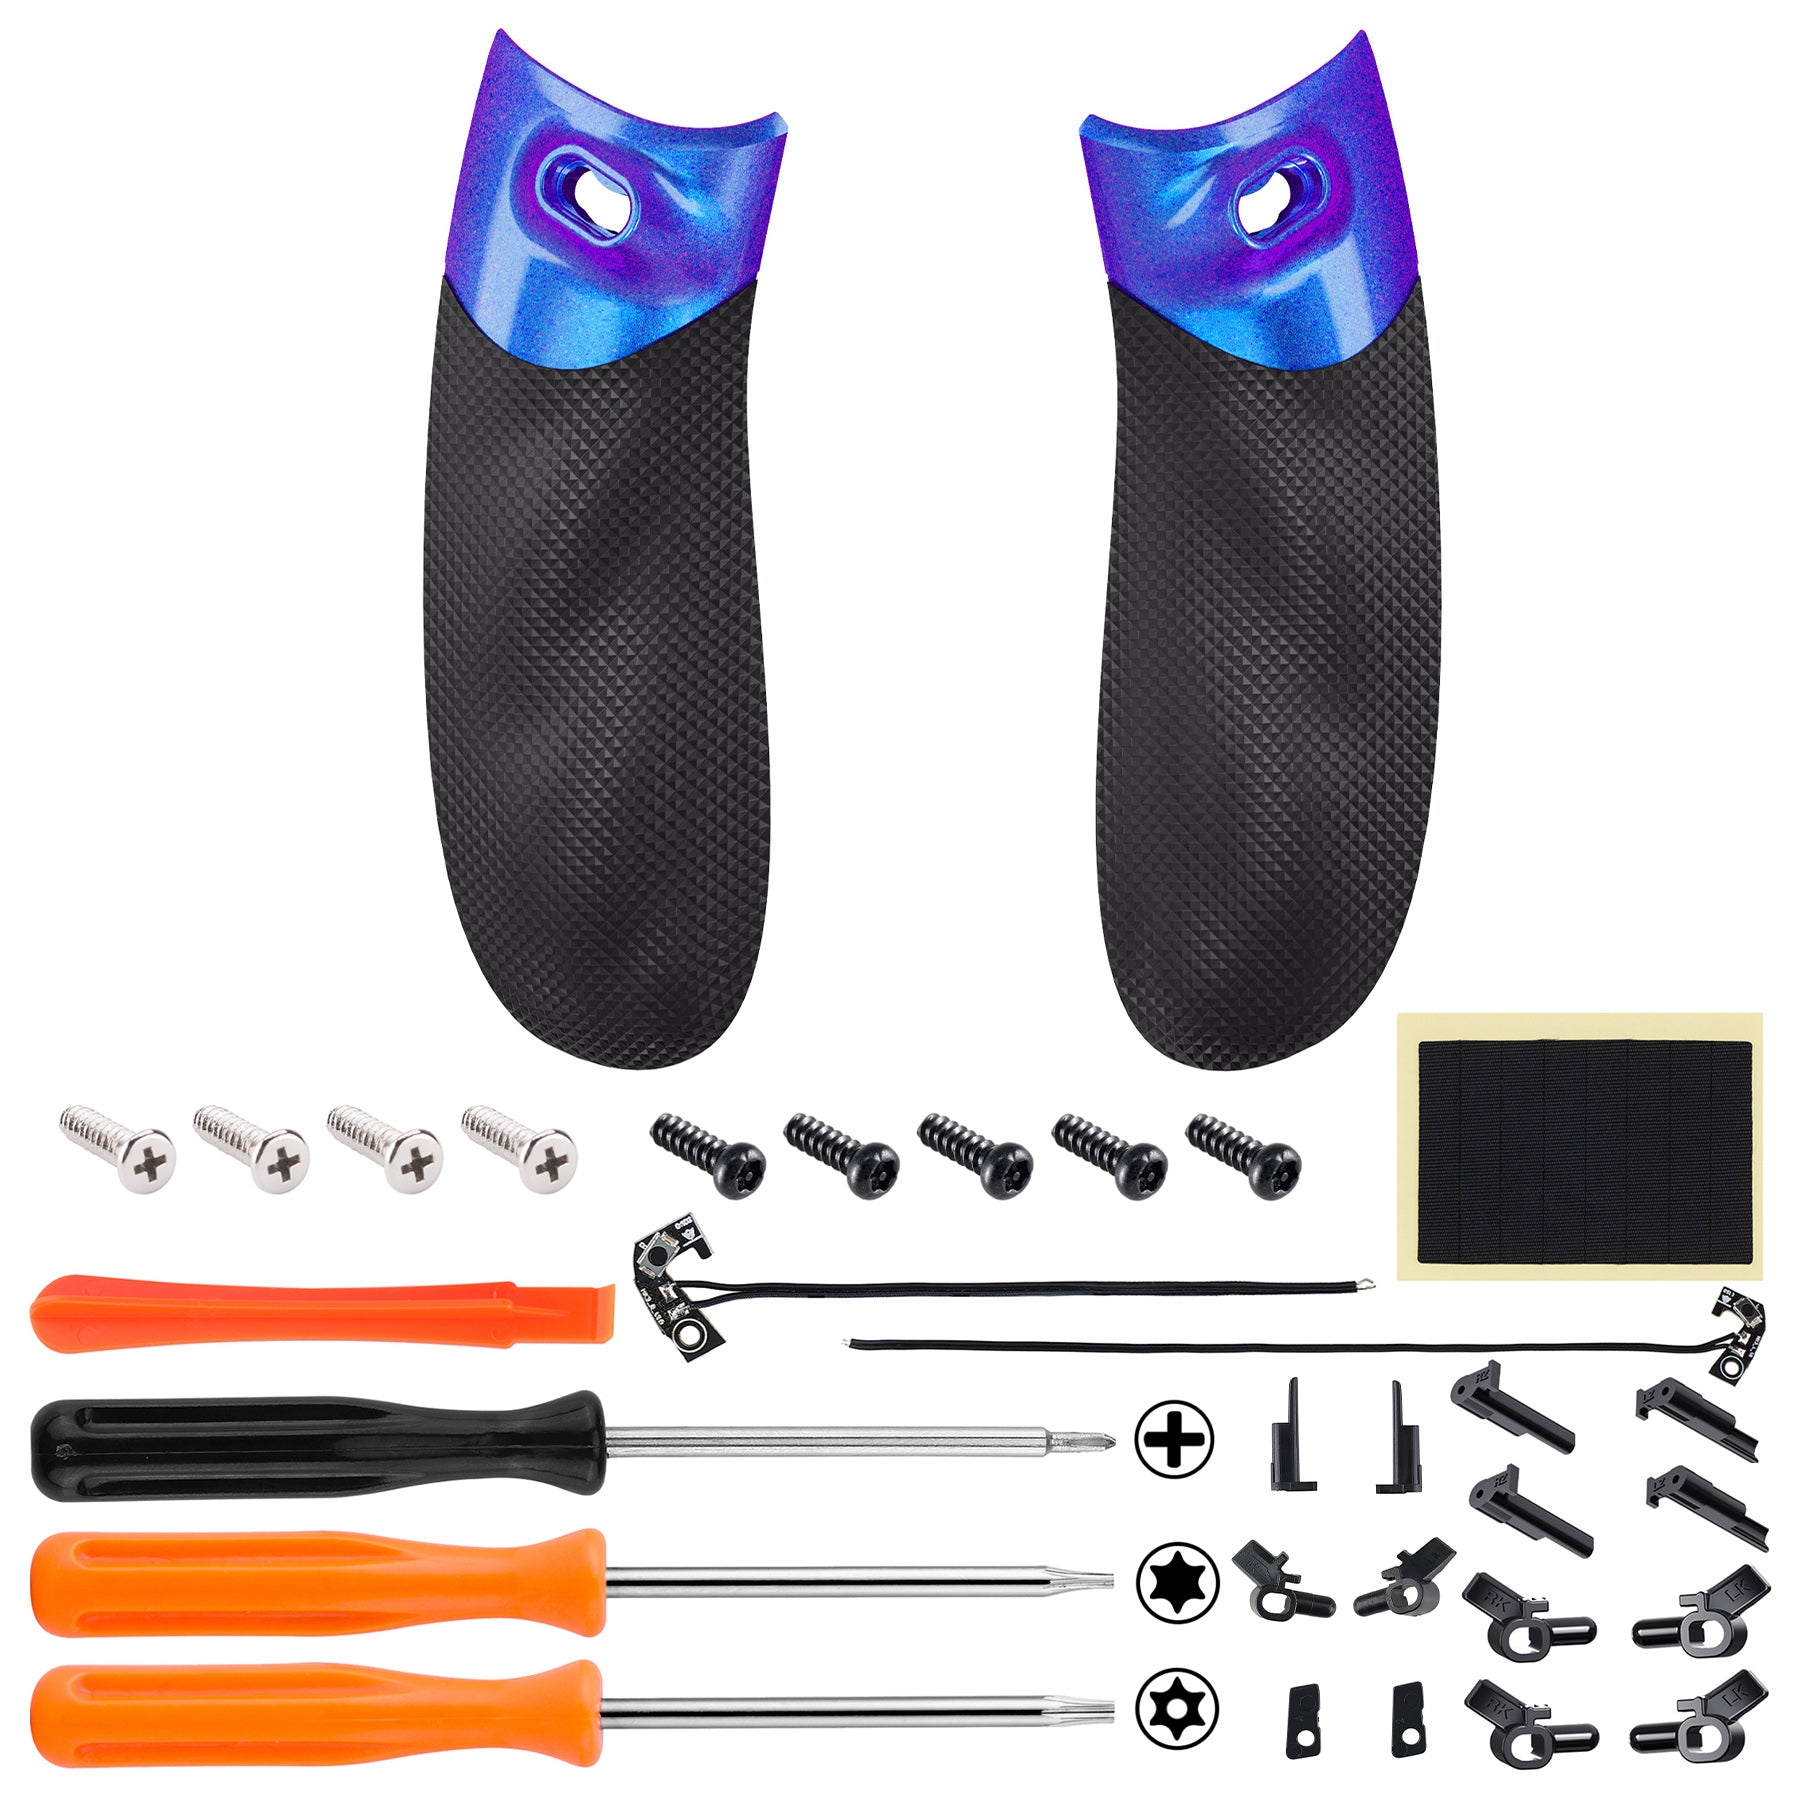 eXtremeRate Retail Flexor Clicky Rubberized Side Rail Grips Trigger Stop Kit for Xbox Series X & S Controller, Diamond Textured Chameleon Purple Blue Anti-Slip Ergonomic Trigger Stopper Handle Grips for Xbox Core Controller - PX3Q3002P